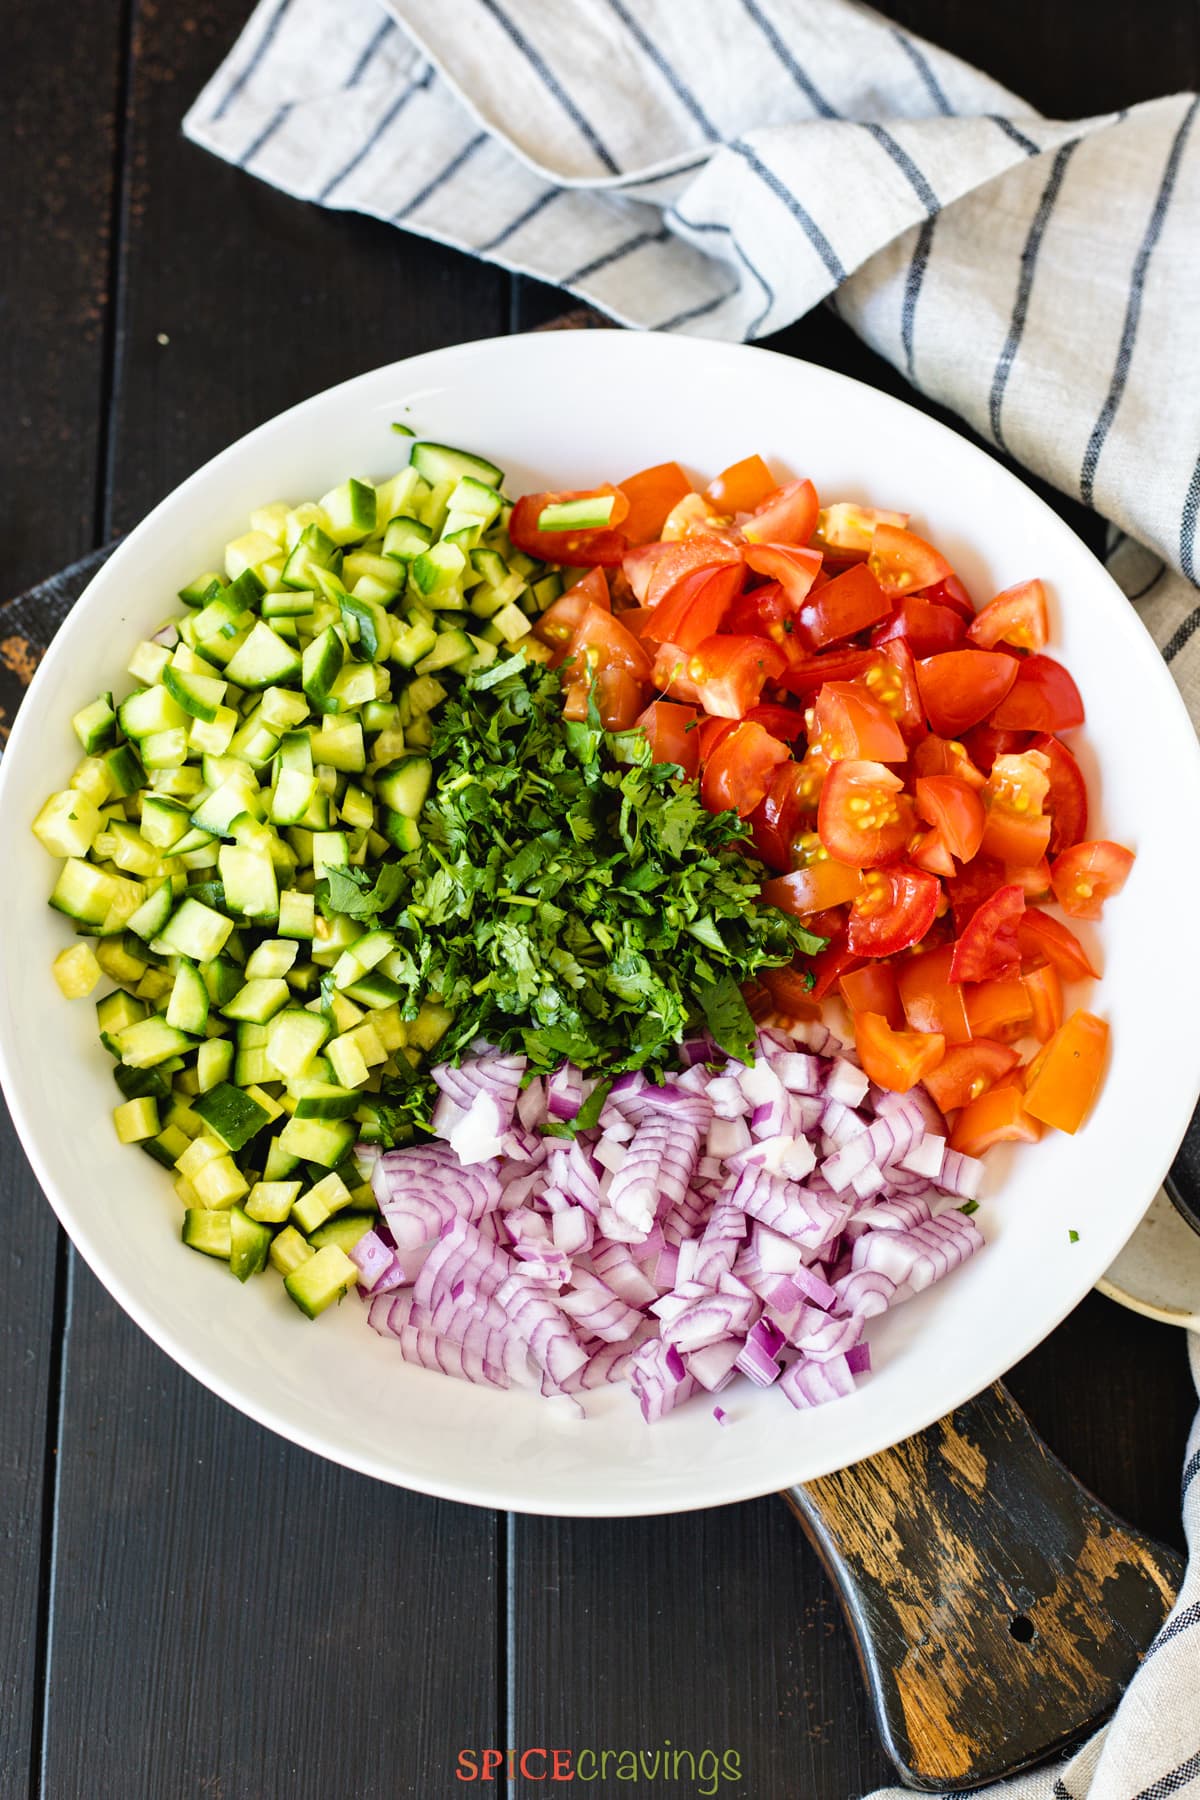 chopped salad made of cucumber, tomato, cilantro and onion in white bowl